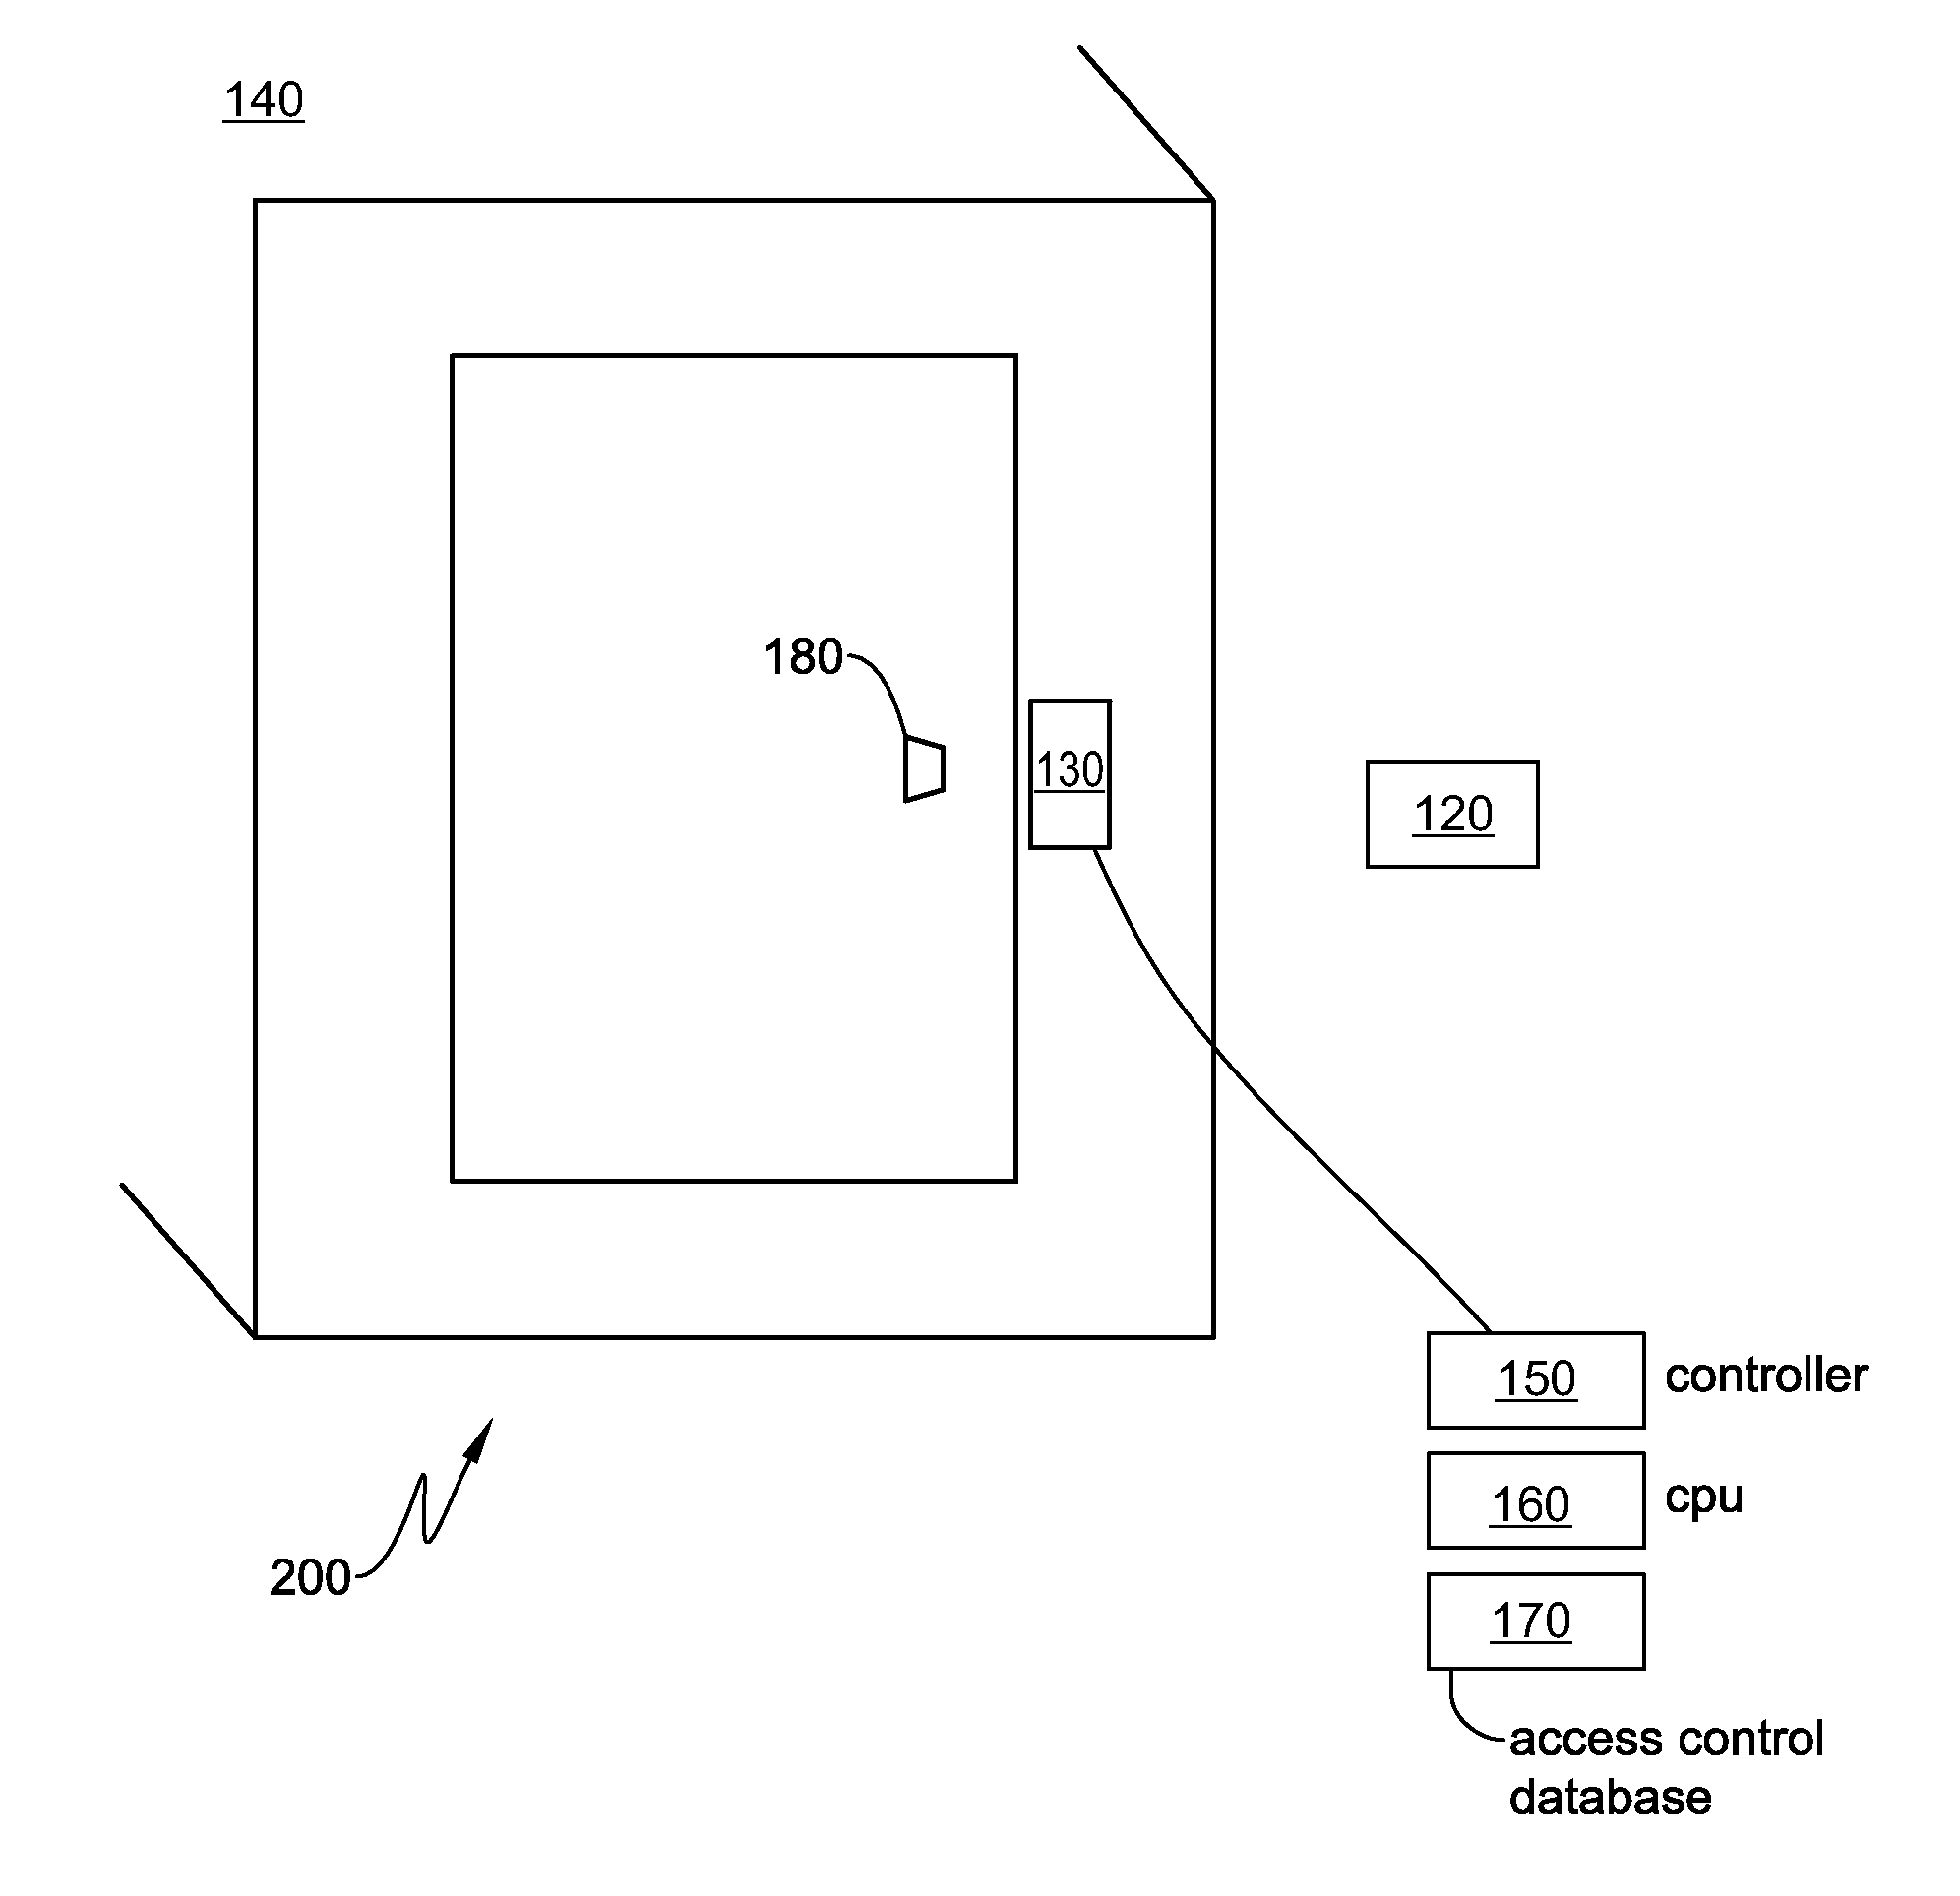 Method and System for Detecting Duress Using Proximity Card